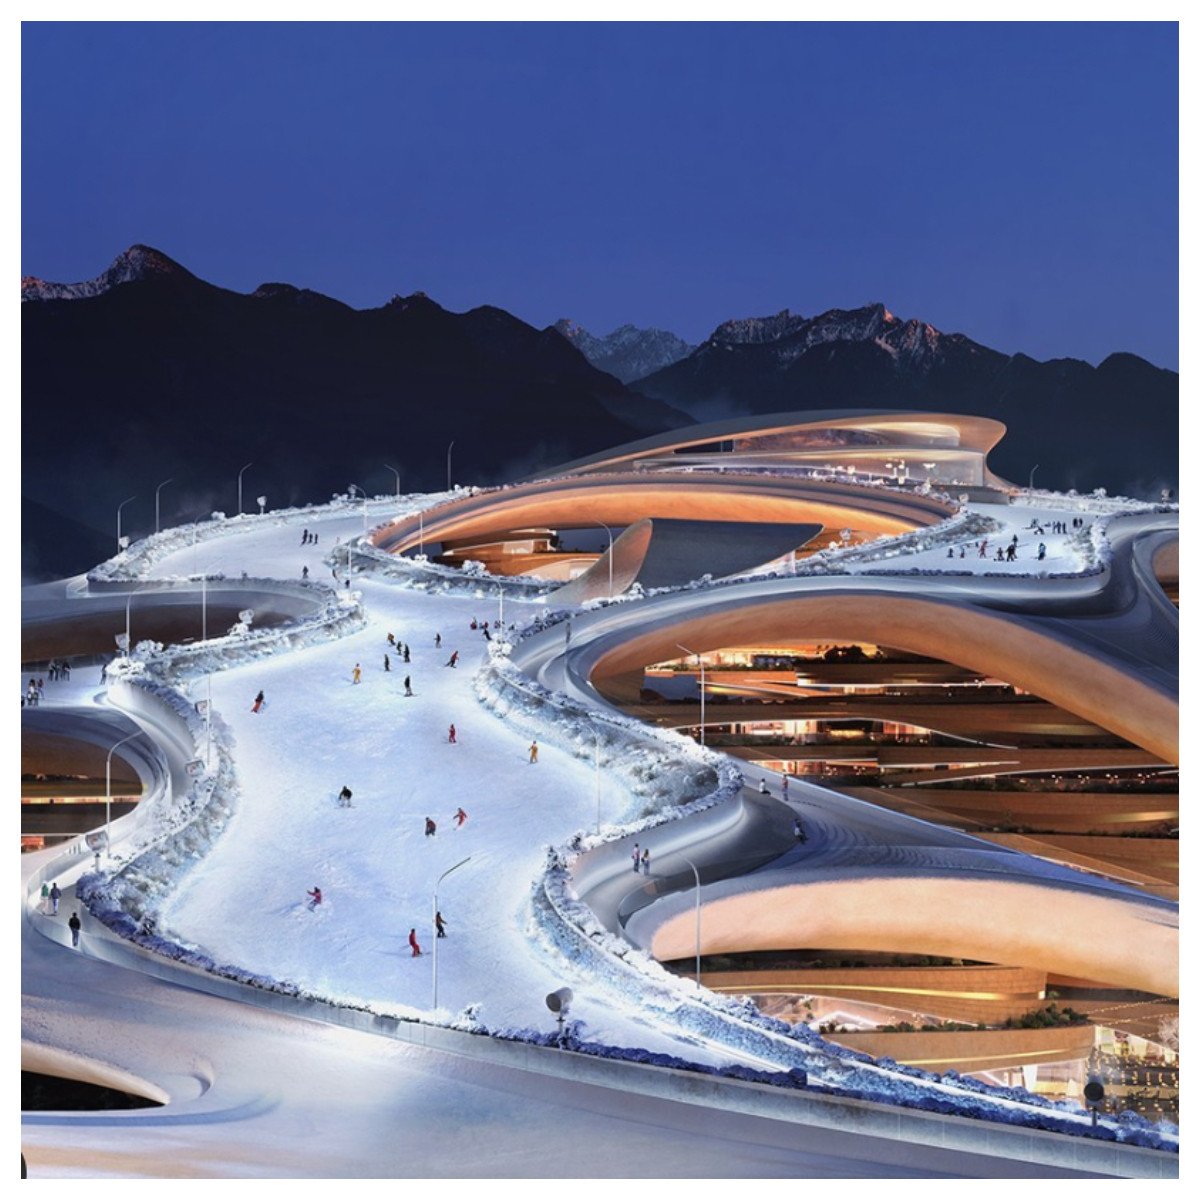 Saudi Arabia is pulling out all the stops to create one of the world’s most environmentally friendly and futuristic ski resorts. Photo: @aedas_architects/Instagram